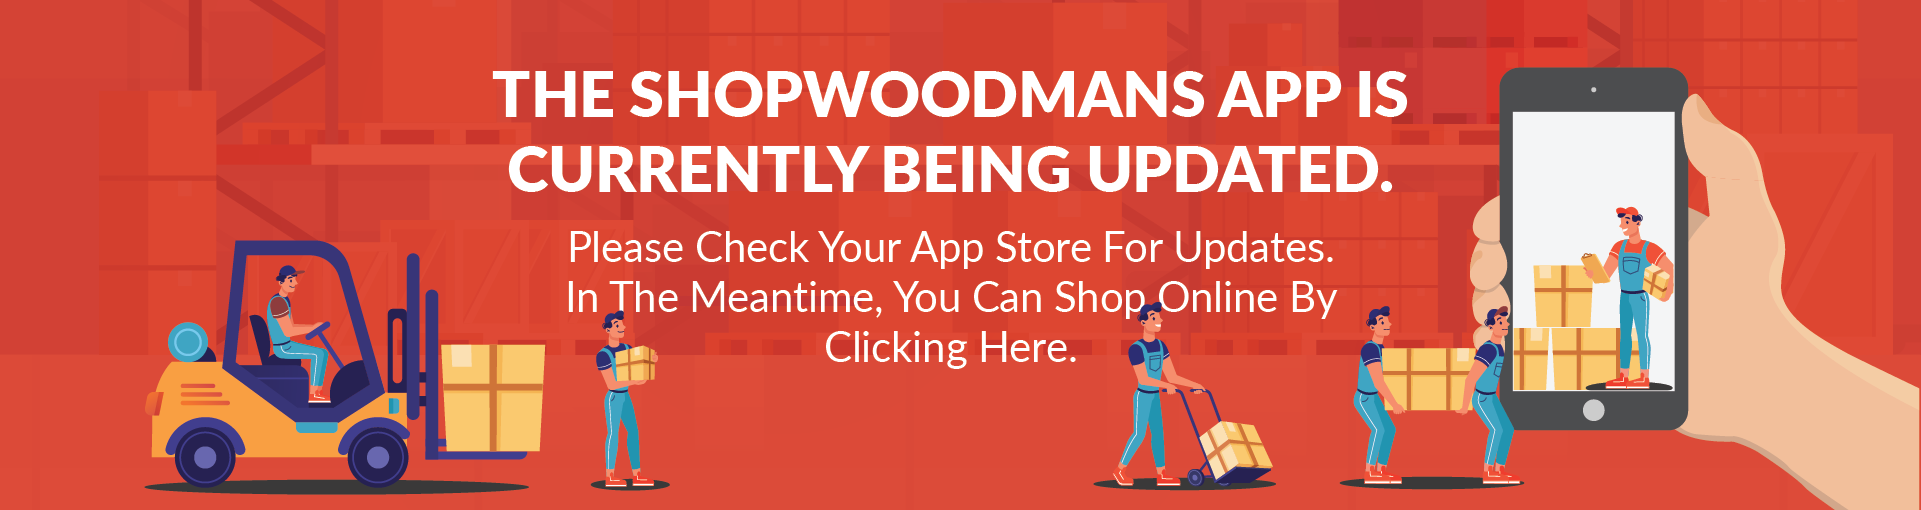 The Shopwoodmans.com app is currently being updated. In the Meantime, click here to be taken to Shopwoodmans.com